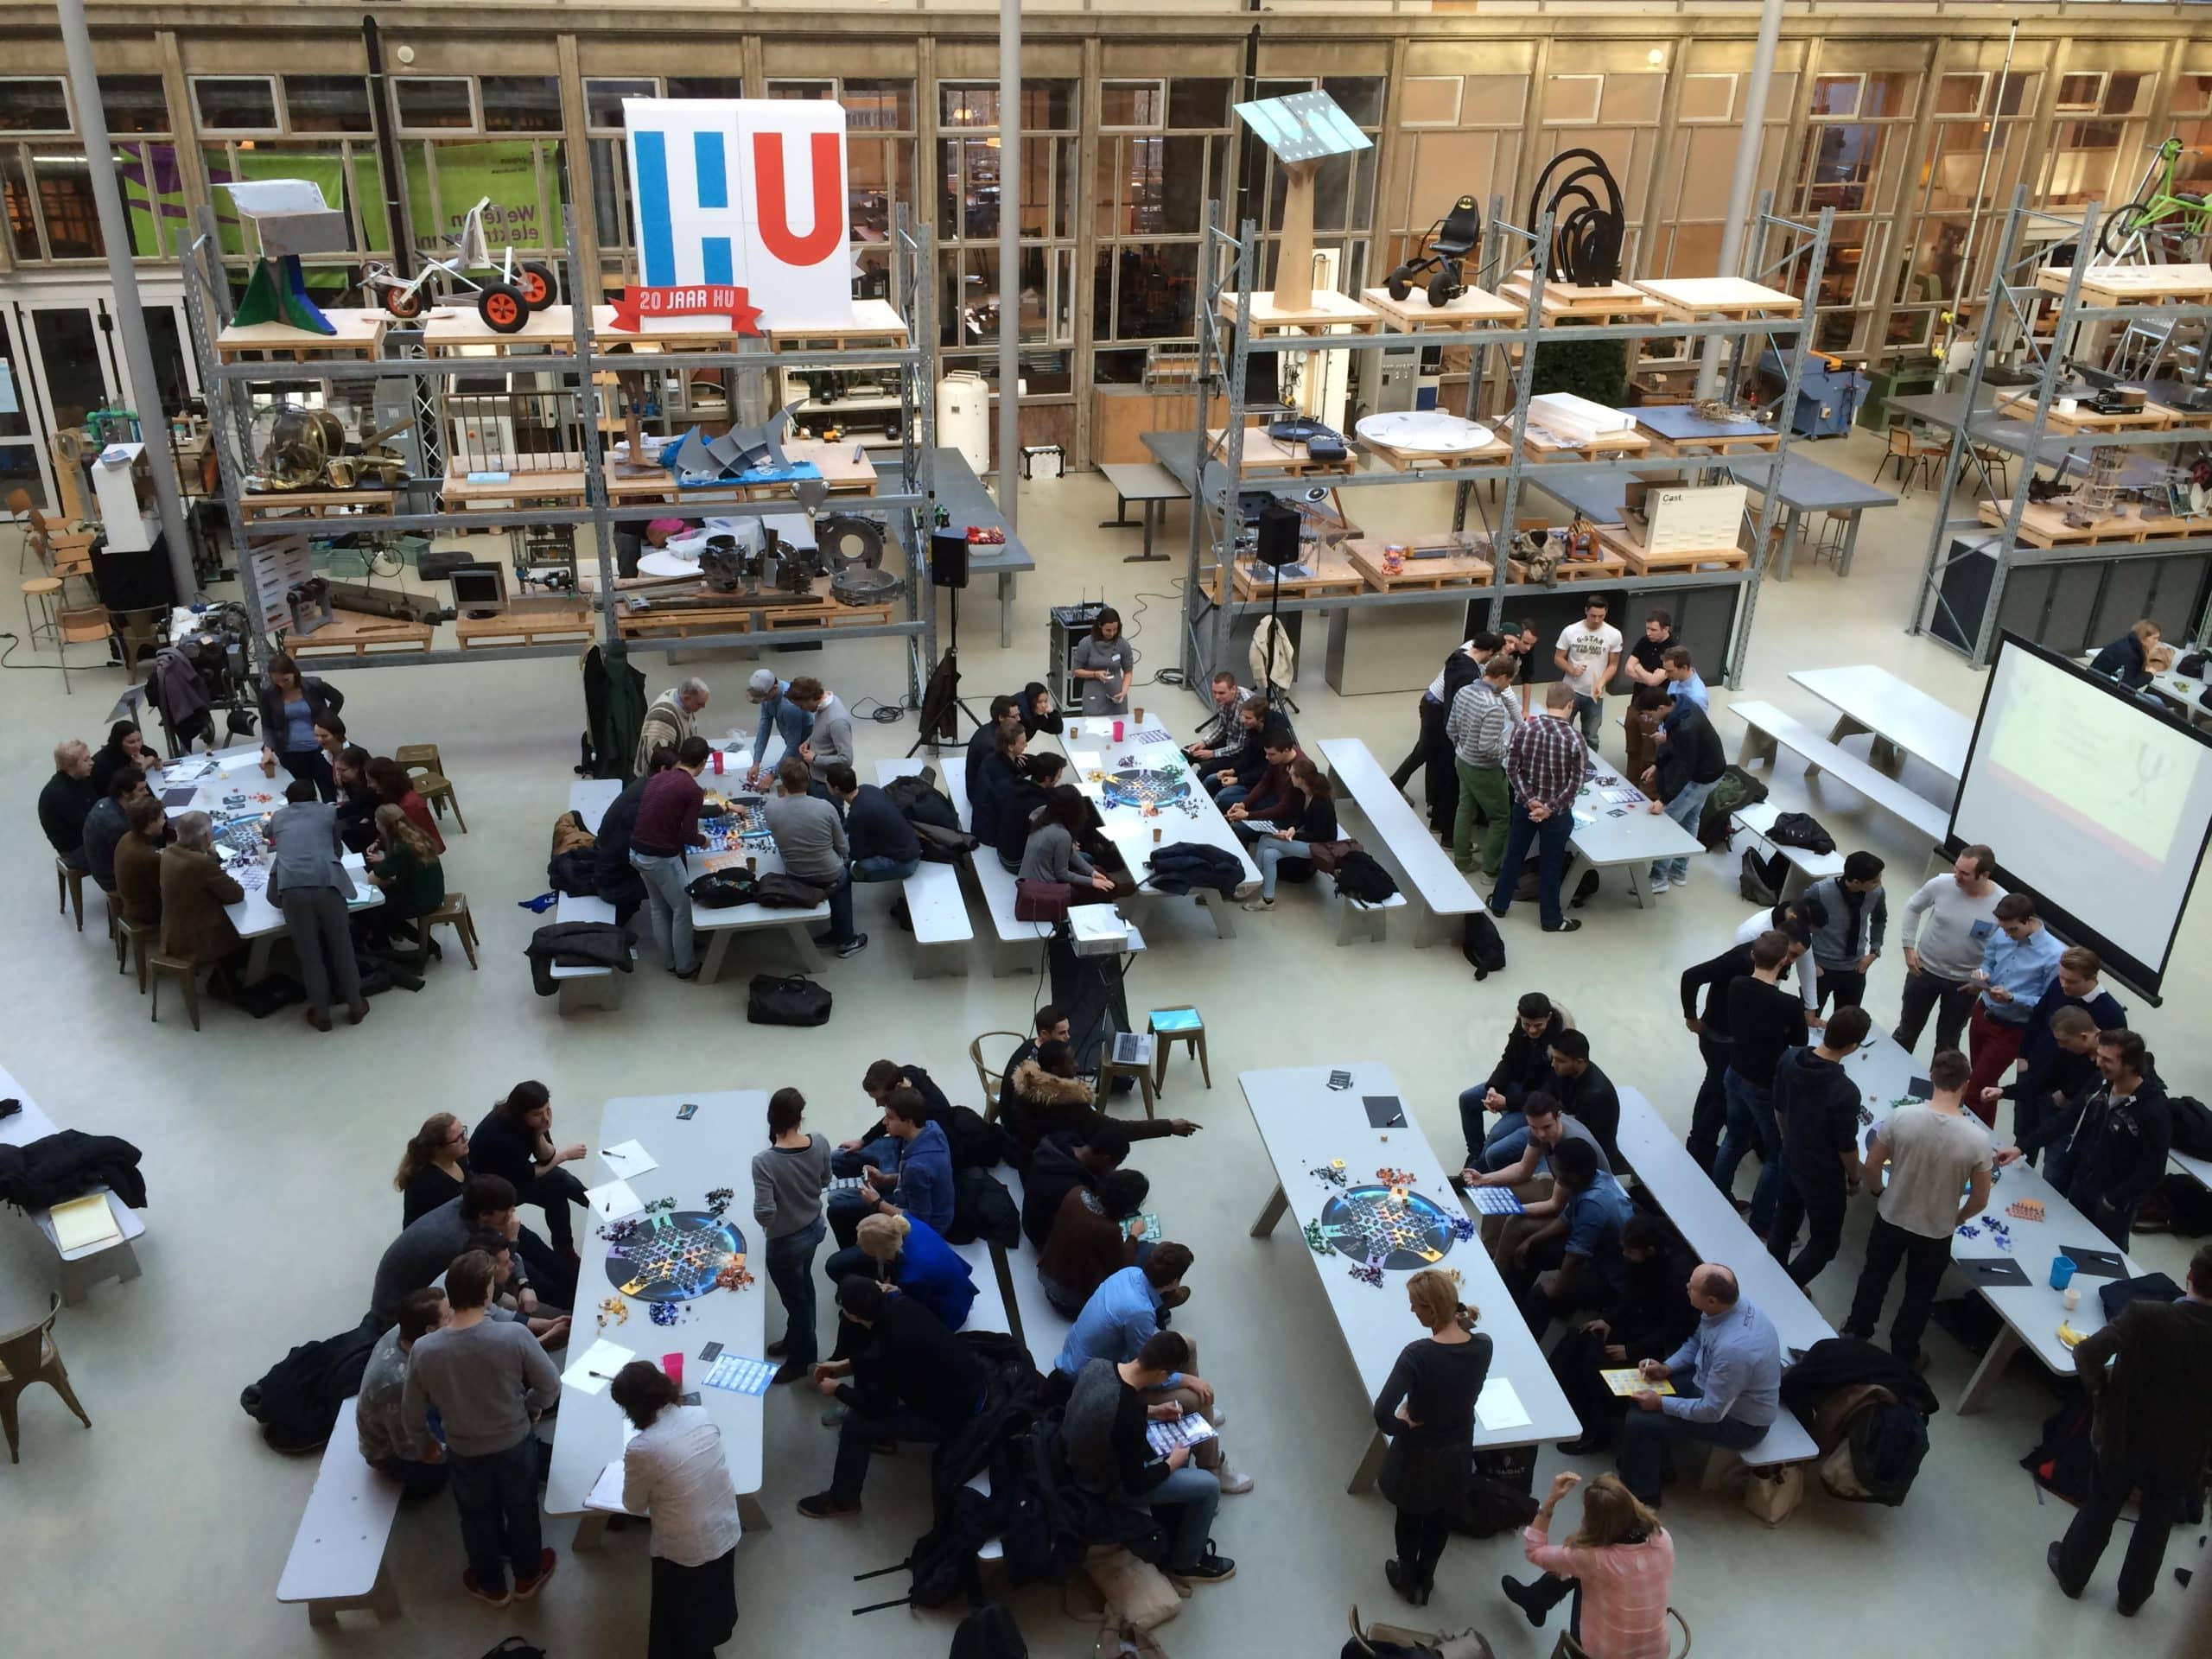 80 Hogeschool Utrecht students discover why they need mindsight